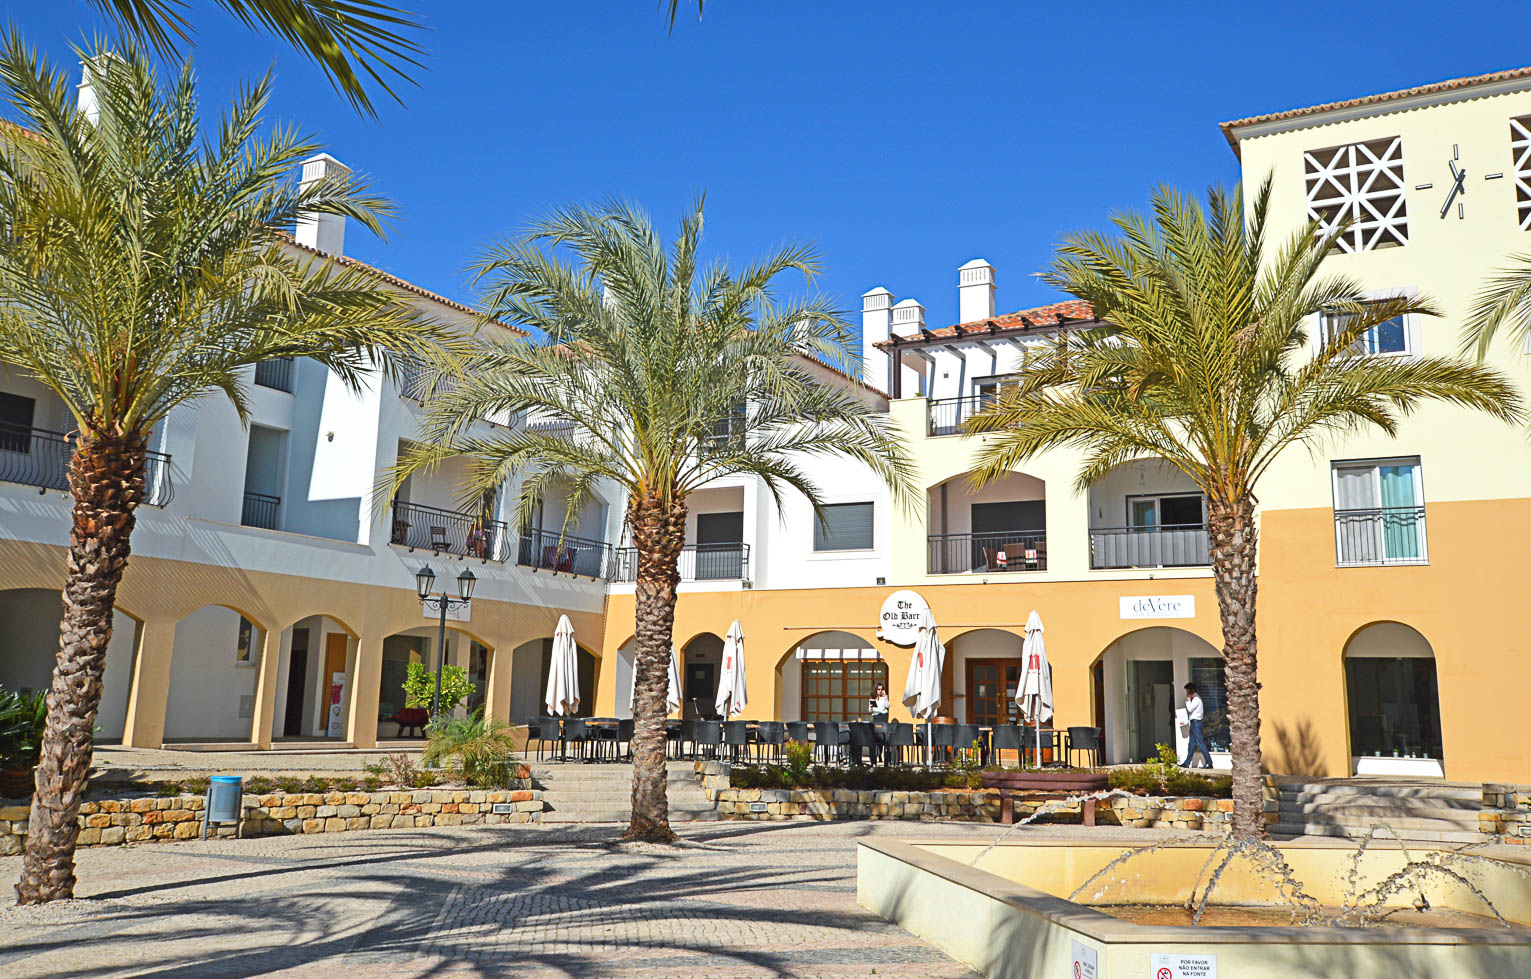 2 Bed, 3 Bath, ApartmentFor Sale, Two Bedroom Apartment with Pool & Garage in Sought, Algarve